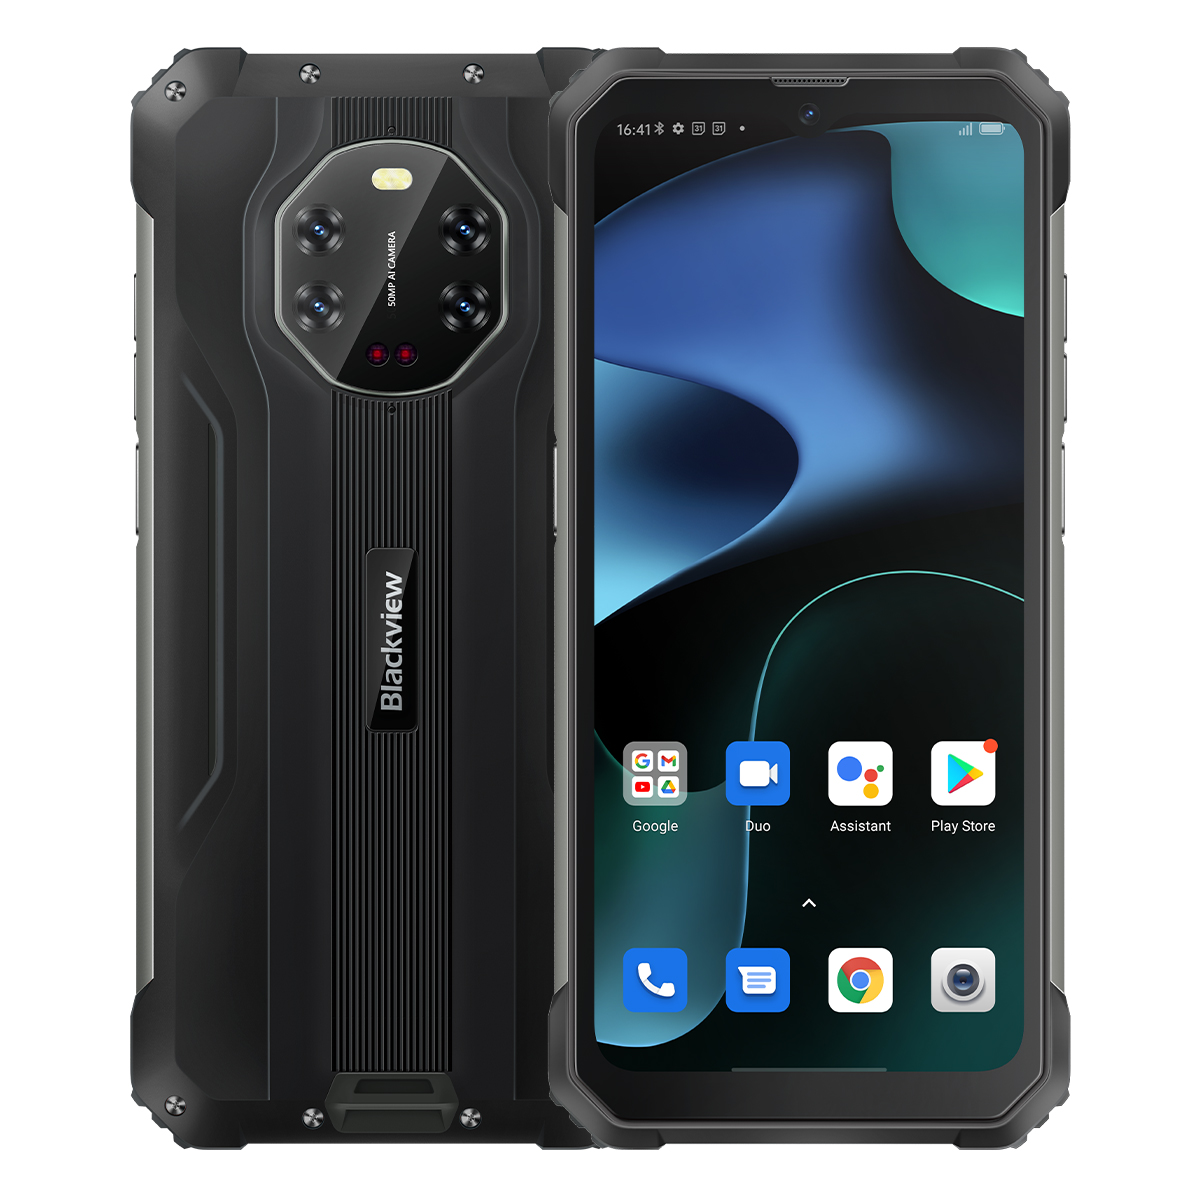 Find Blackview BL8800 5G Global Bands Dimensity 700 8GB 128GB 50MP 20MP Night Vision Camera 8380mAh 6 58 inch Display IP68 IP69K Waterproof NFC Smartphone for Sale on Gipsybee.com with cryptocurrencies